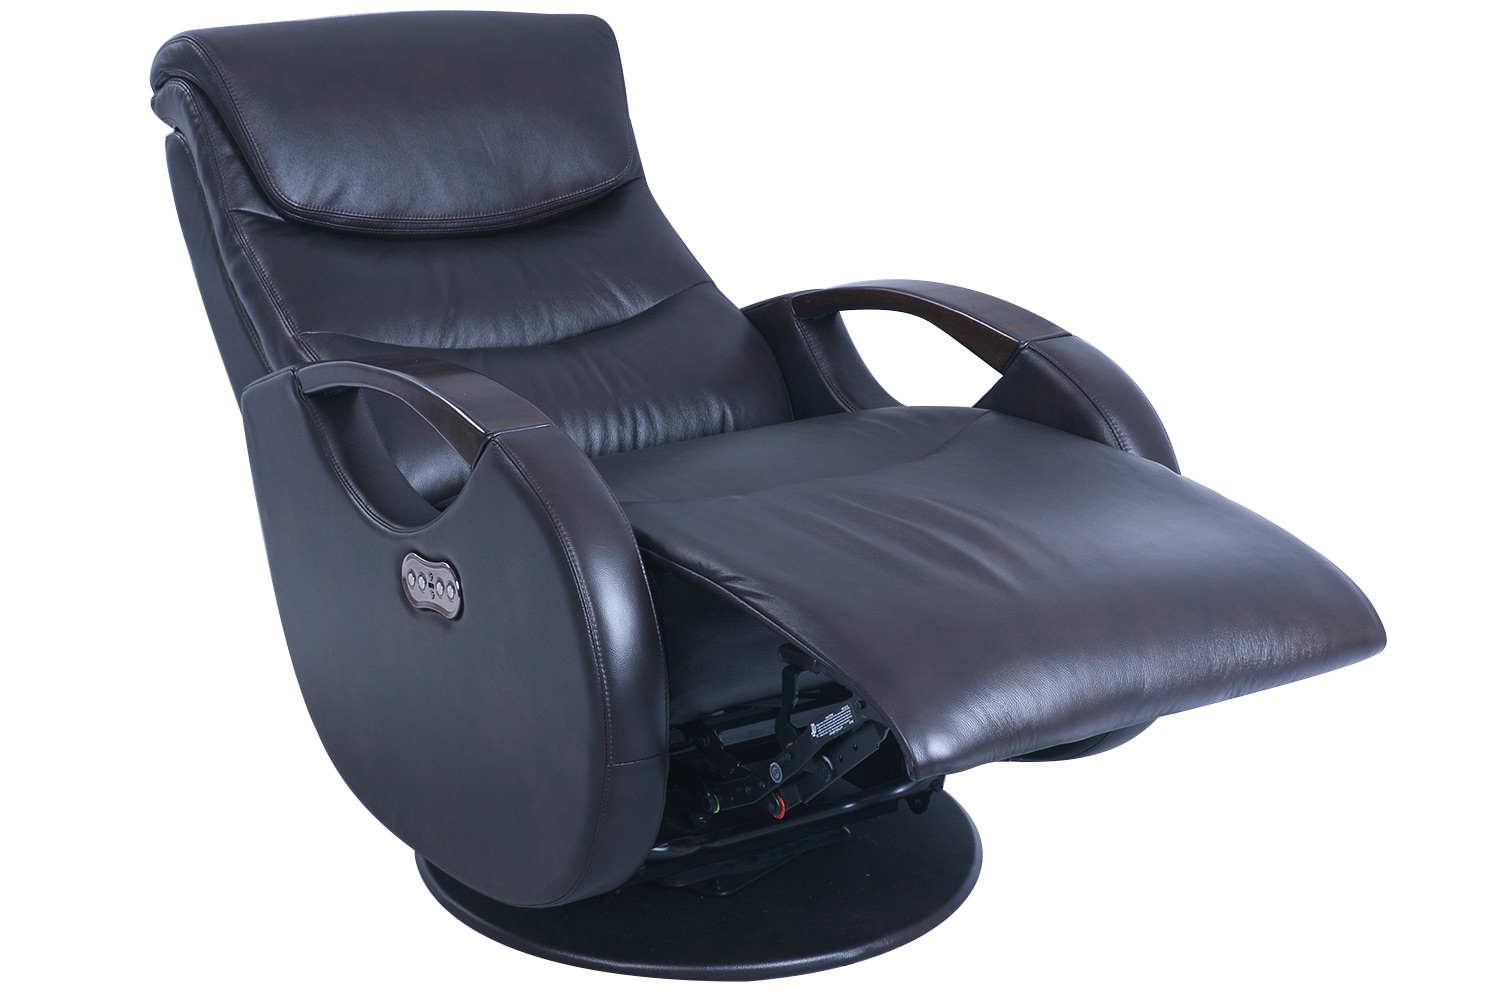 Barcalounger Rico Swivel Glider Power Recliner Chair with Power Head Rest - Dobson Chocolate/Leather Match